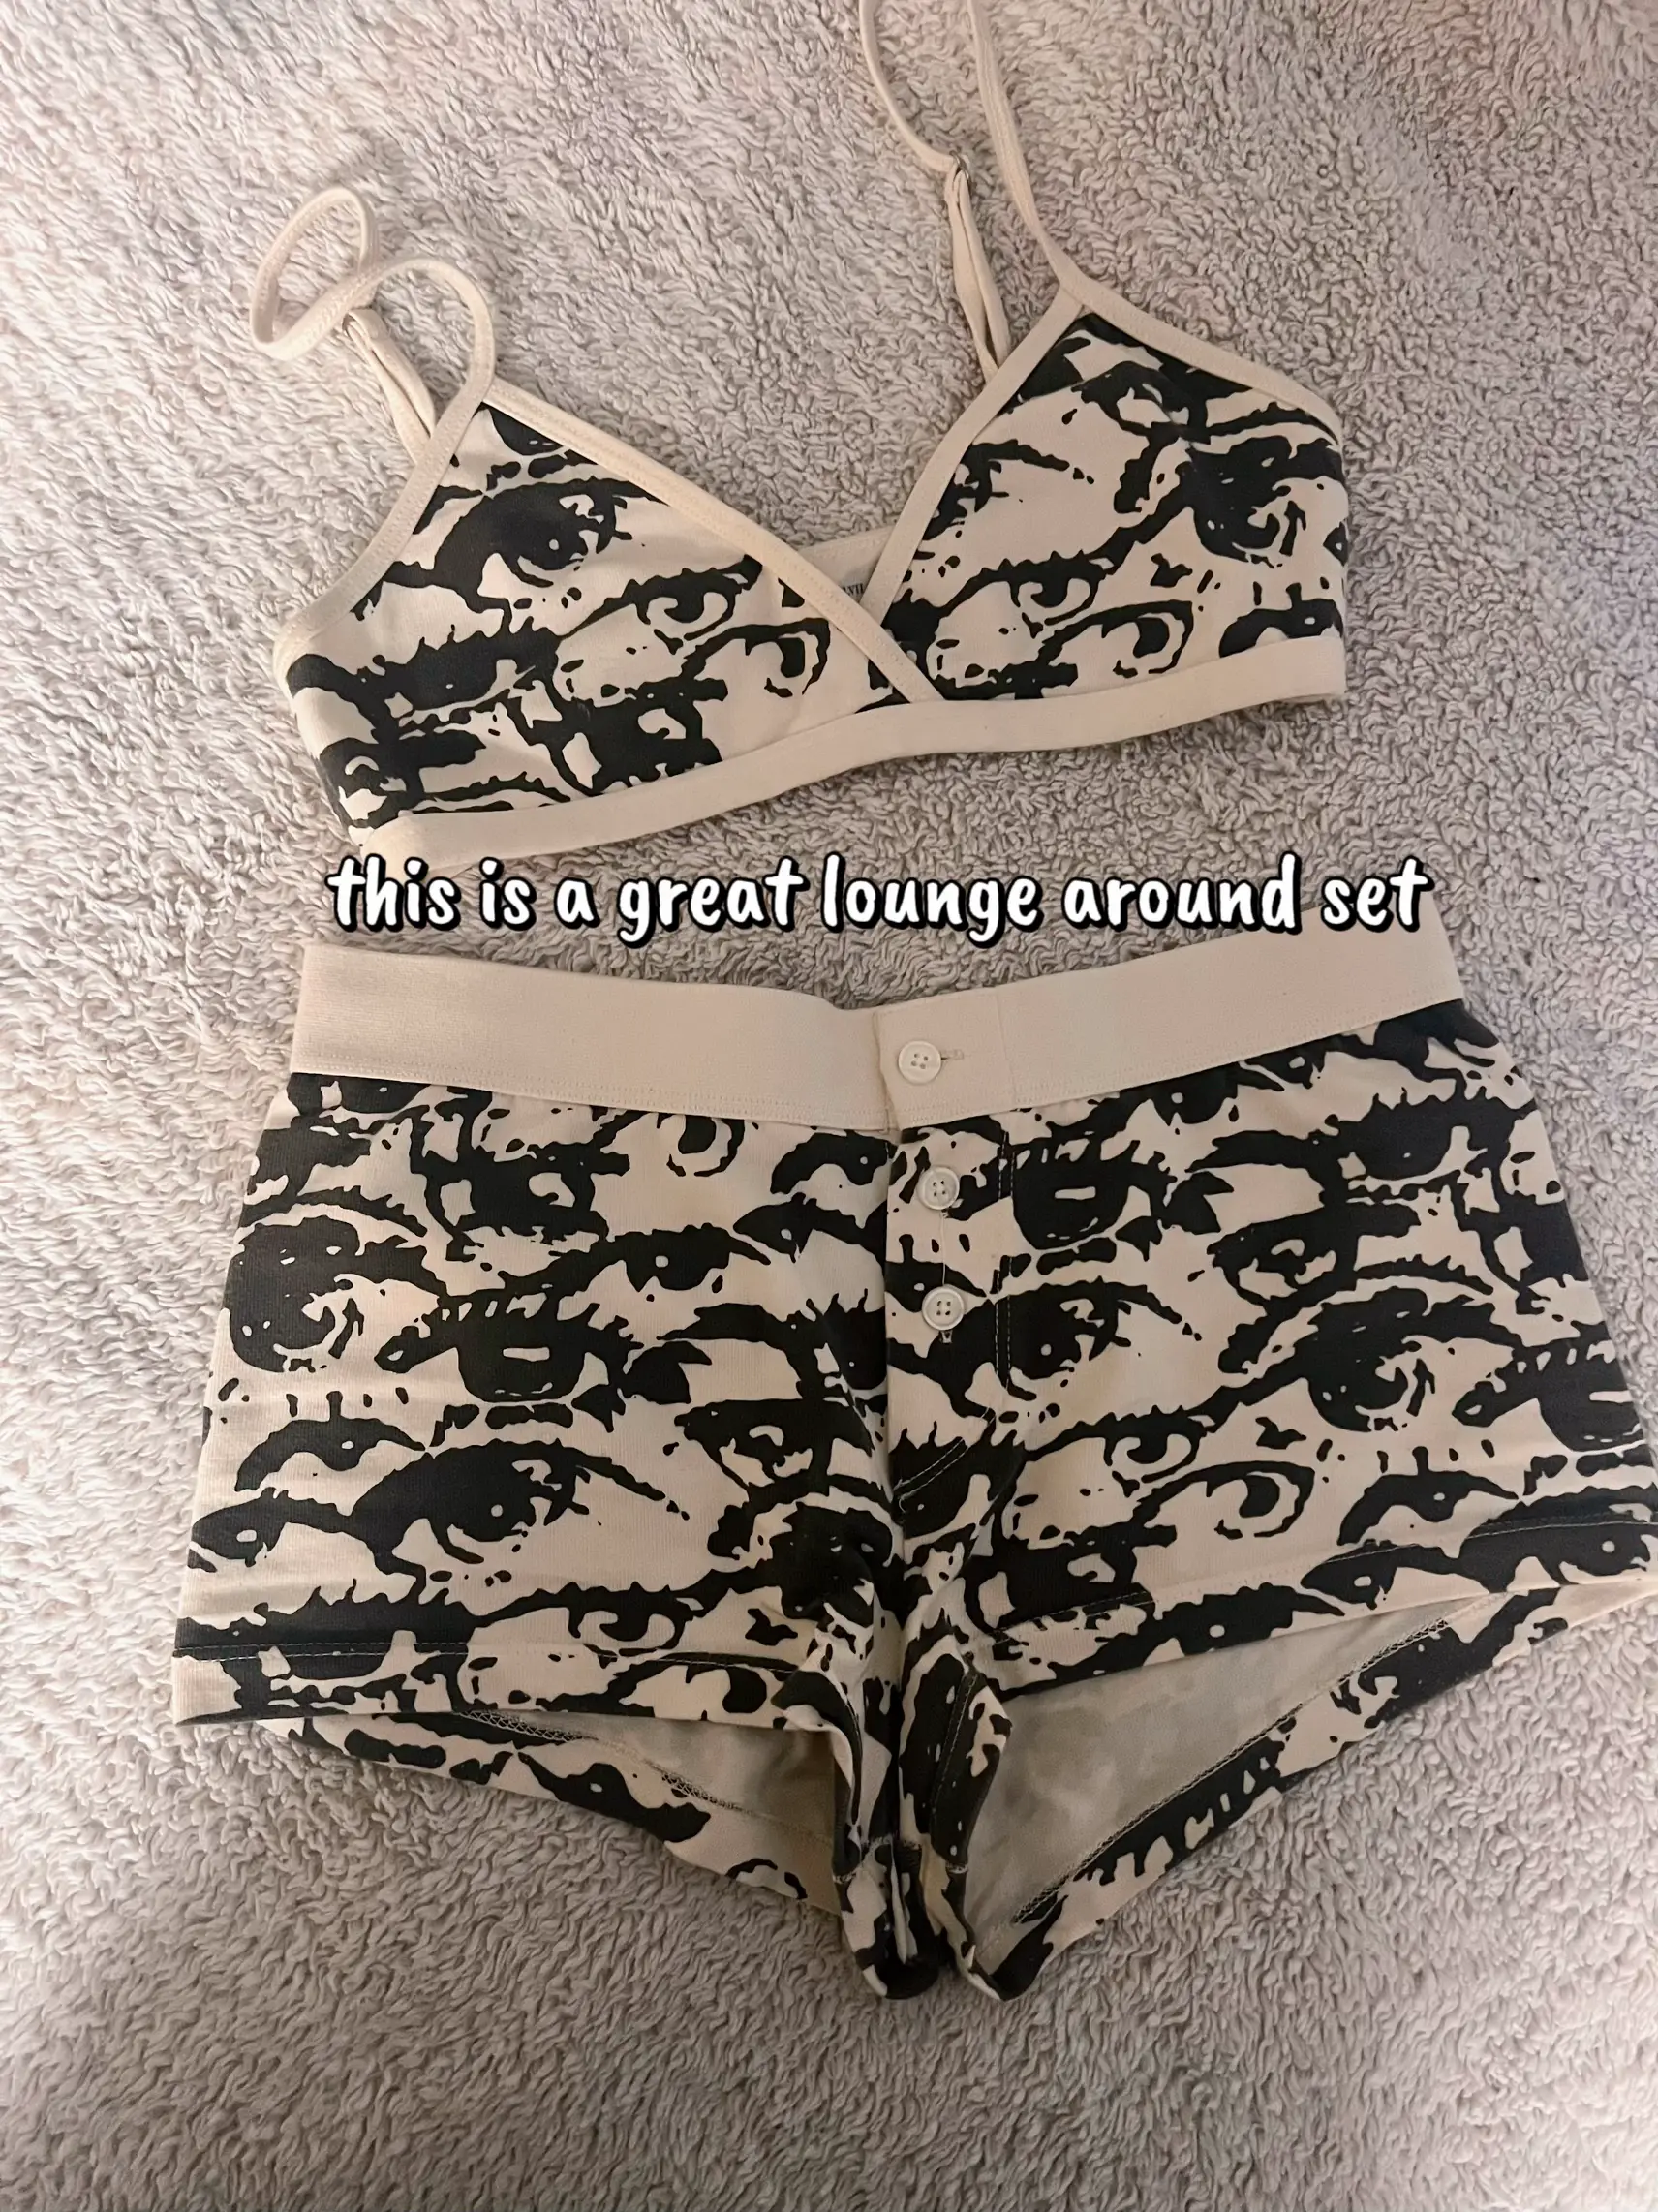 brandy melville heart boxer shorts  Cute lazy day outfits, Cute pajama sets,  Dream clothes